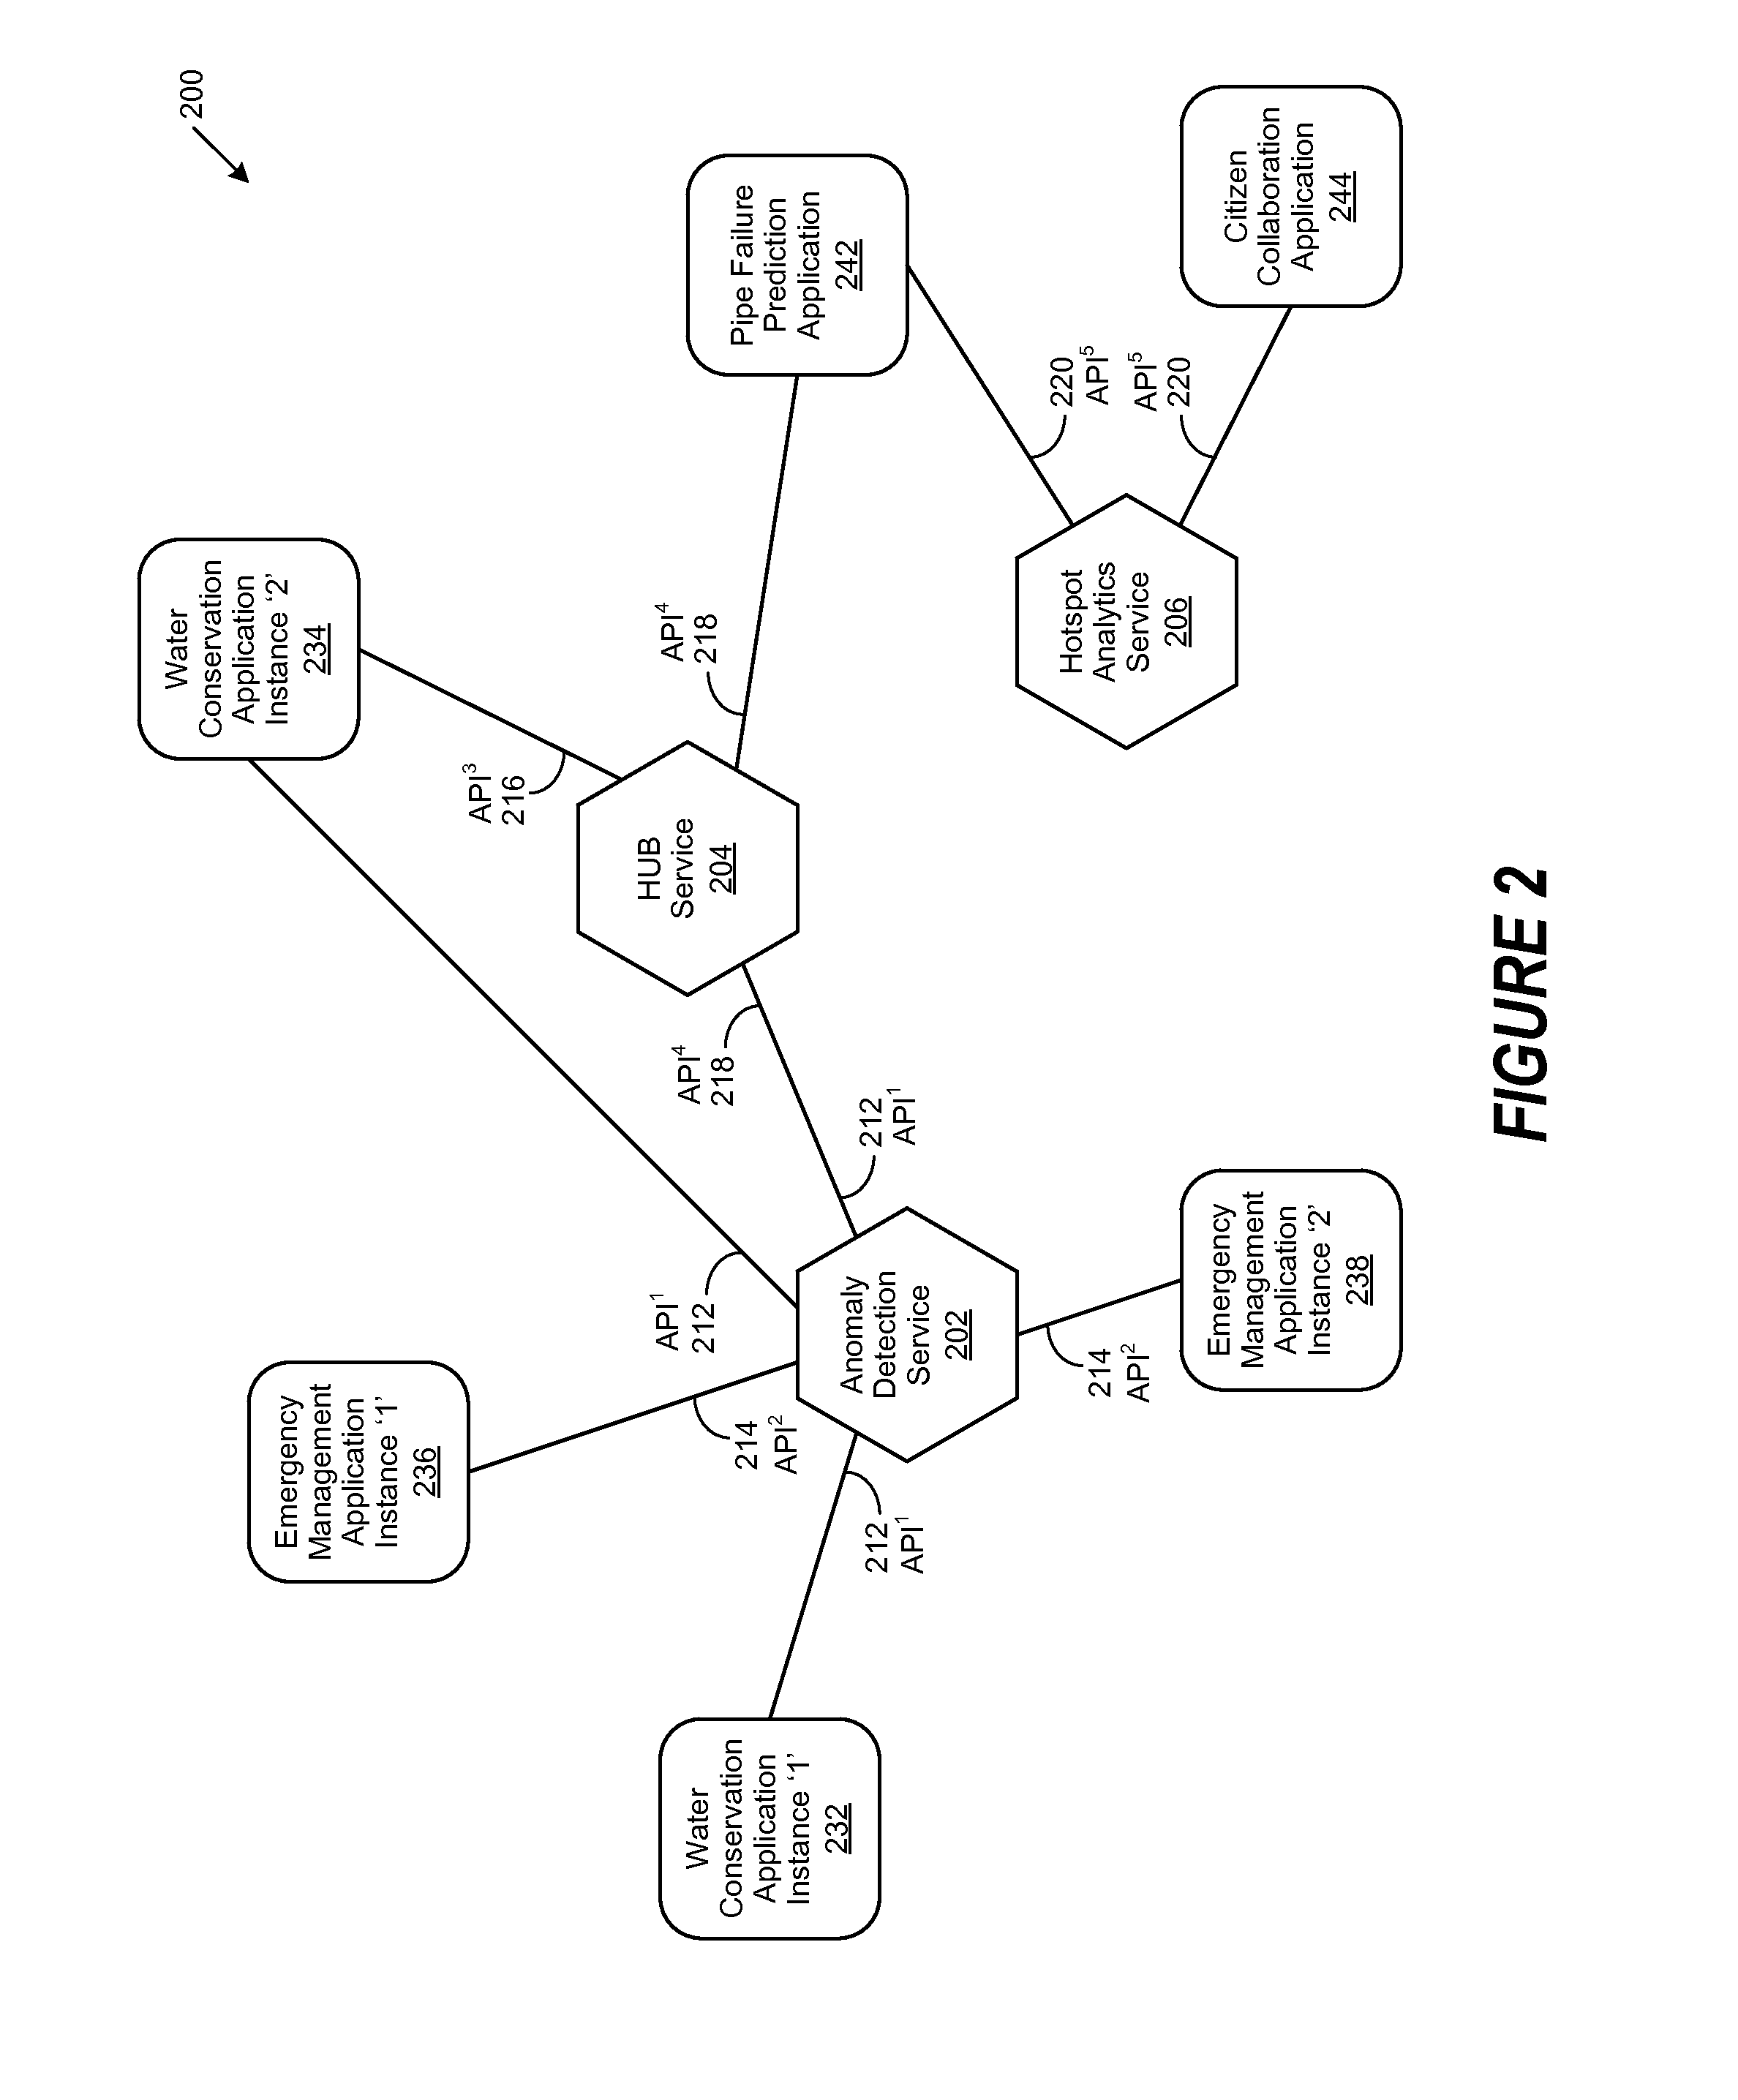 Method and System for Managing Resource Capability in a Service-Centric System